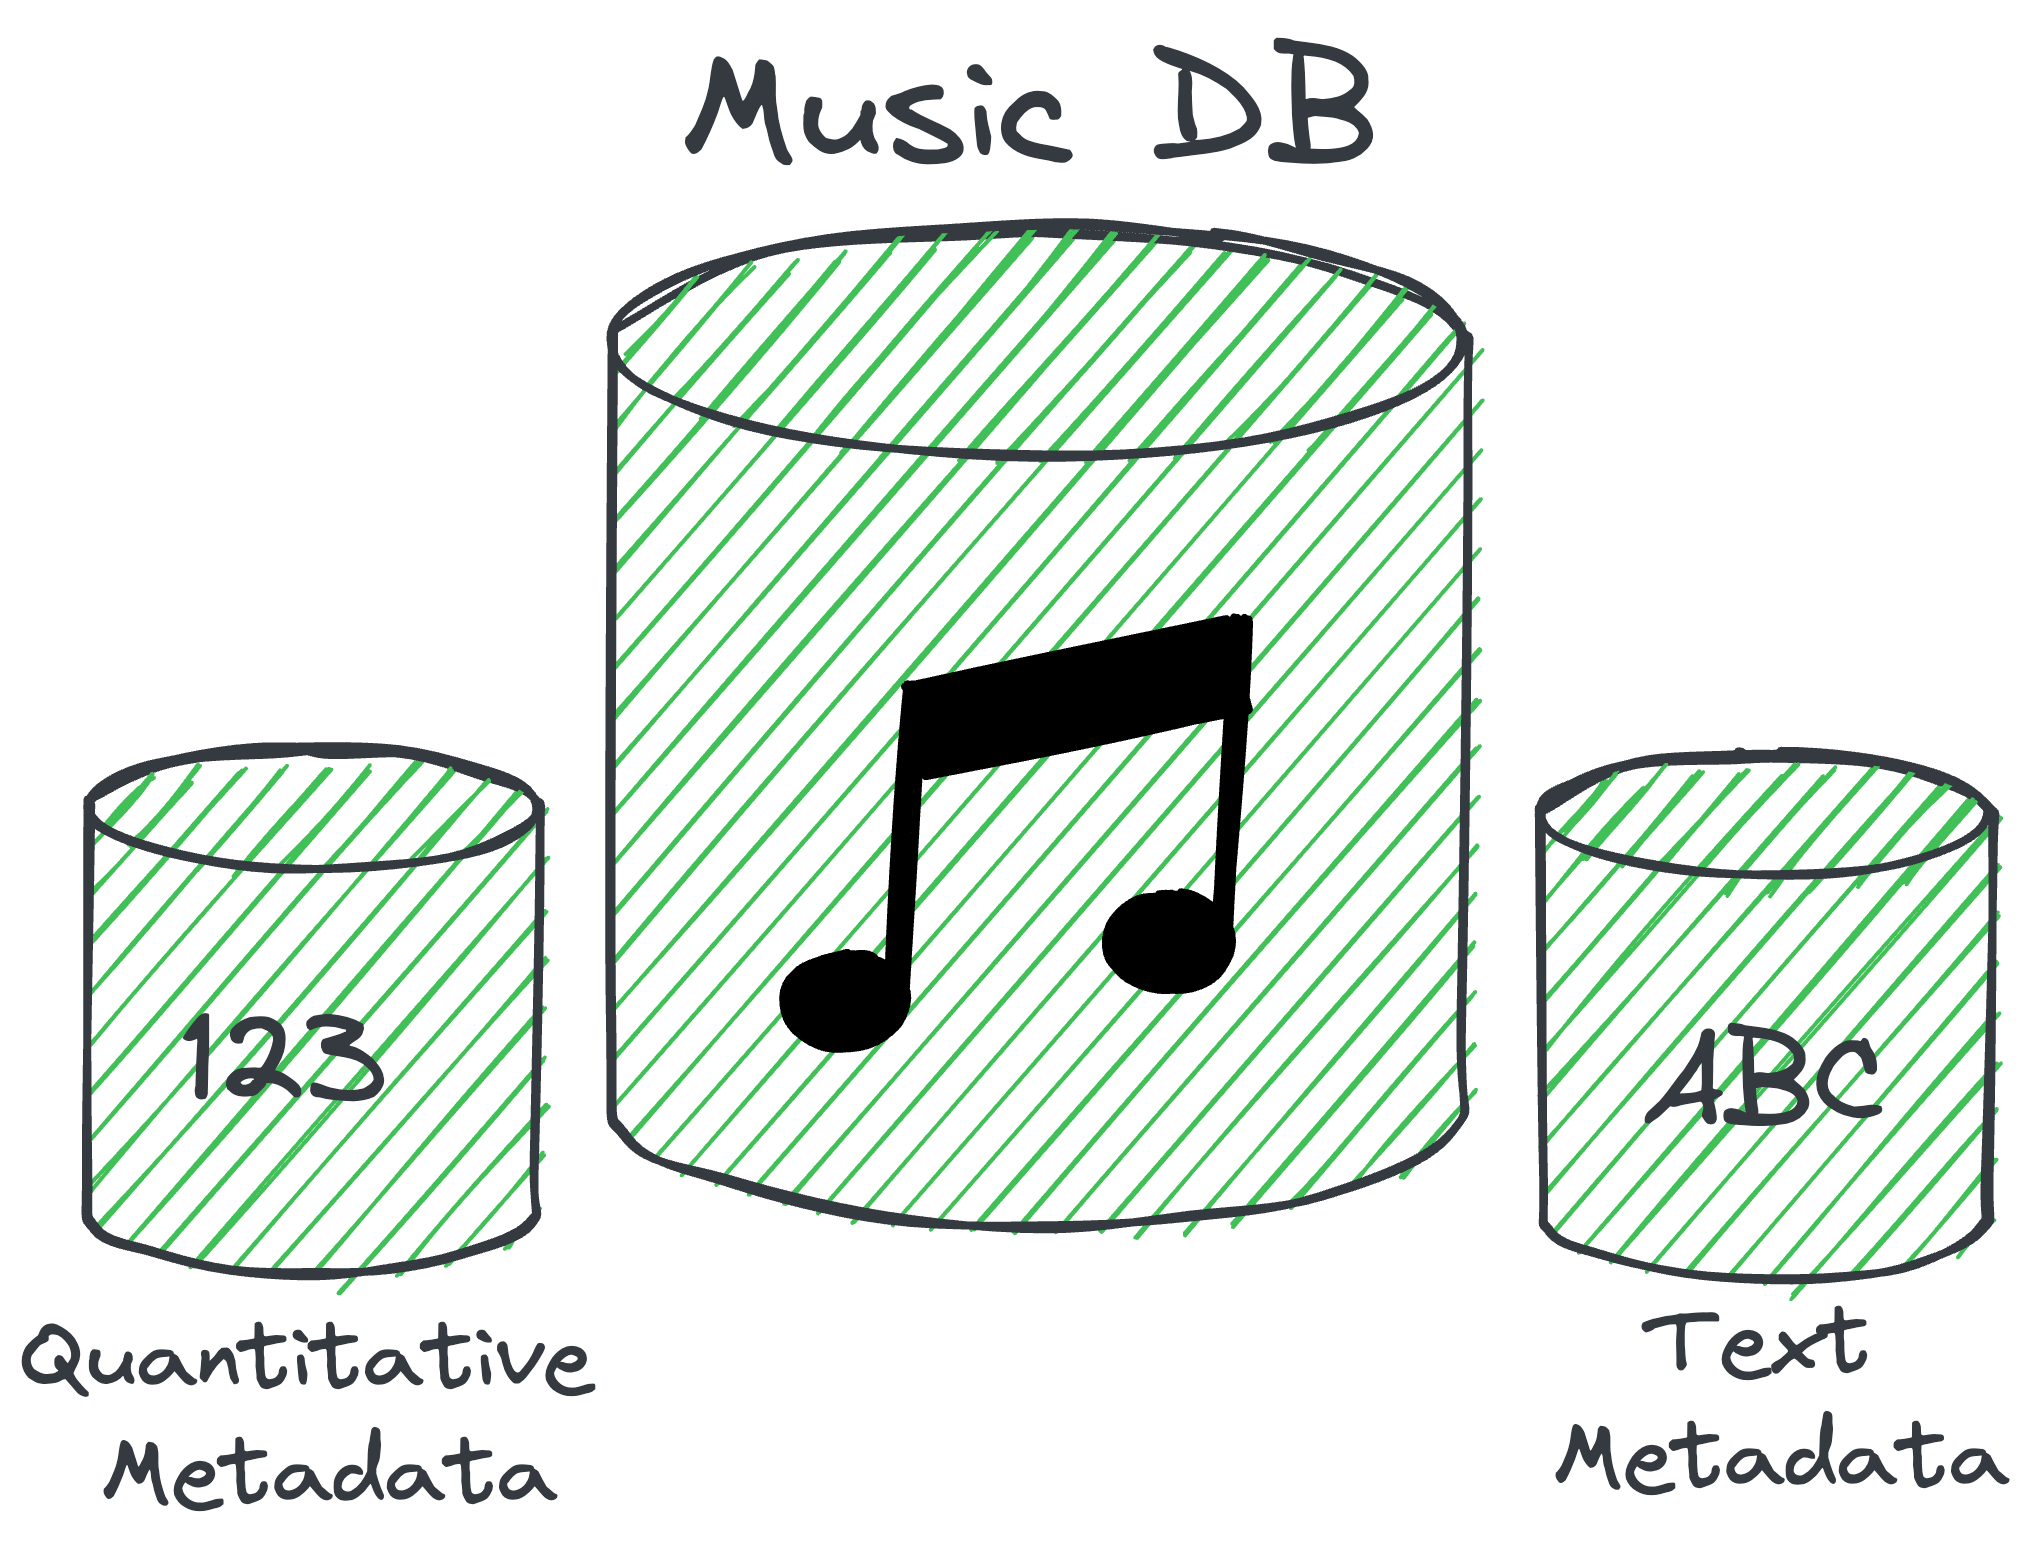 Diagram showing a music DB in the center, with a quantitative metadata database pictured on the left and a text metadata database pictured on the right